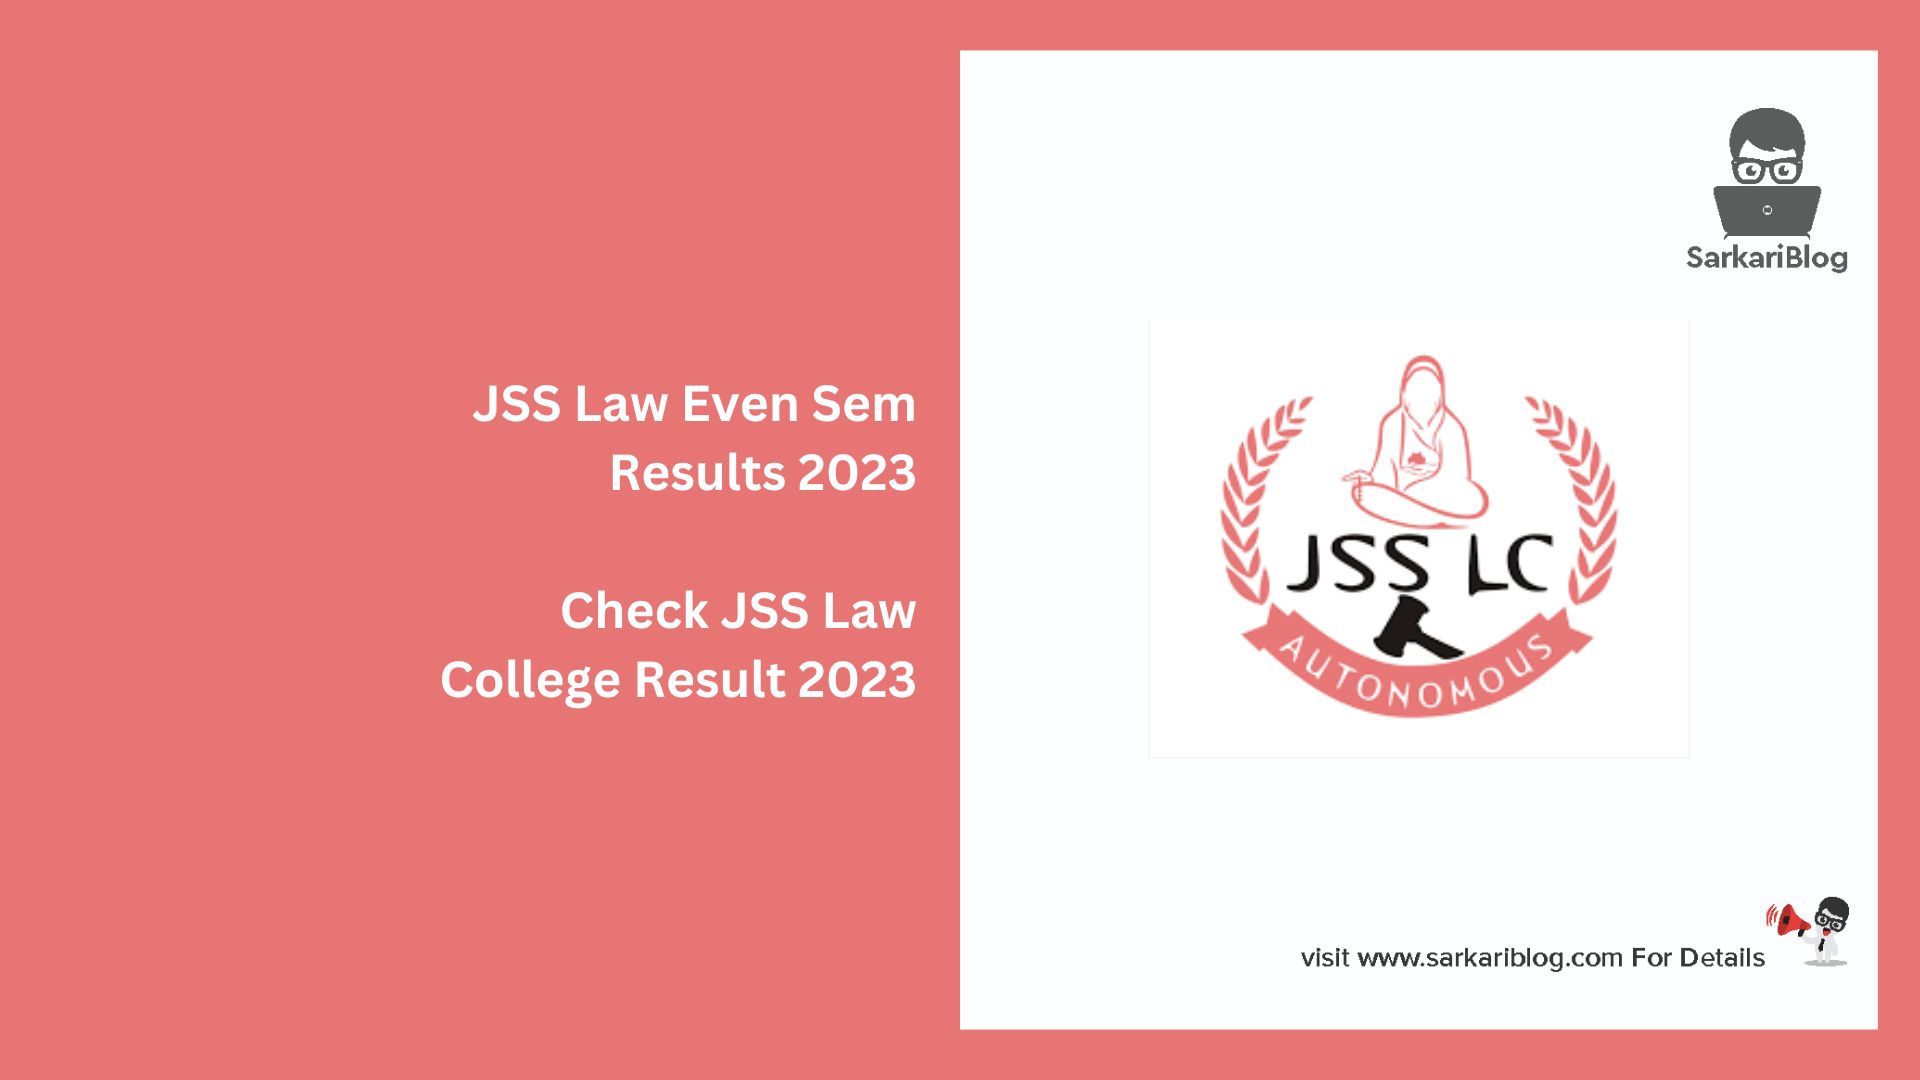 JSS Law Even Sem Results 2023